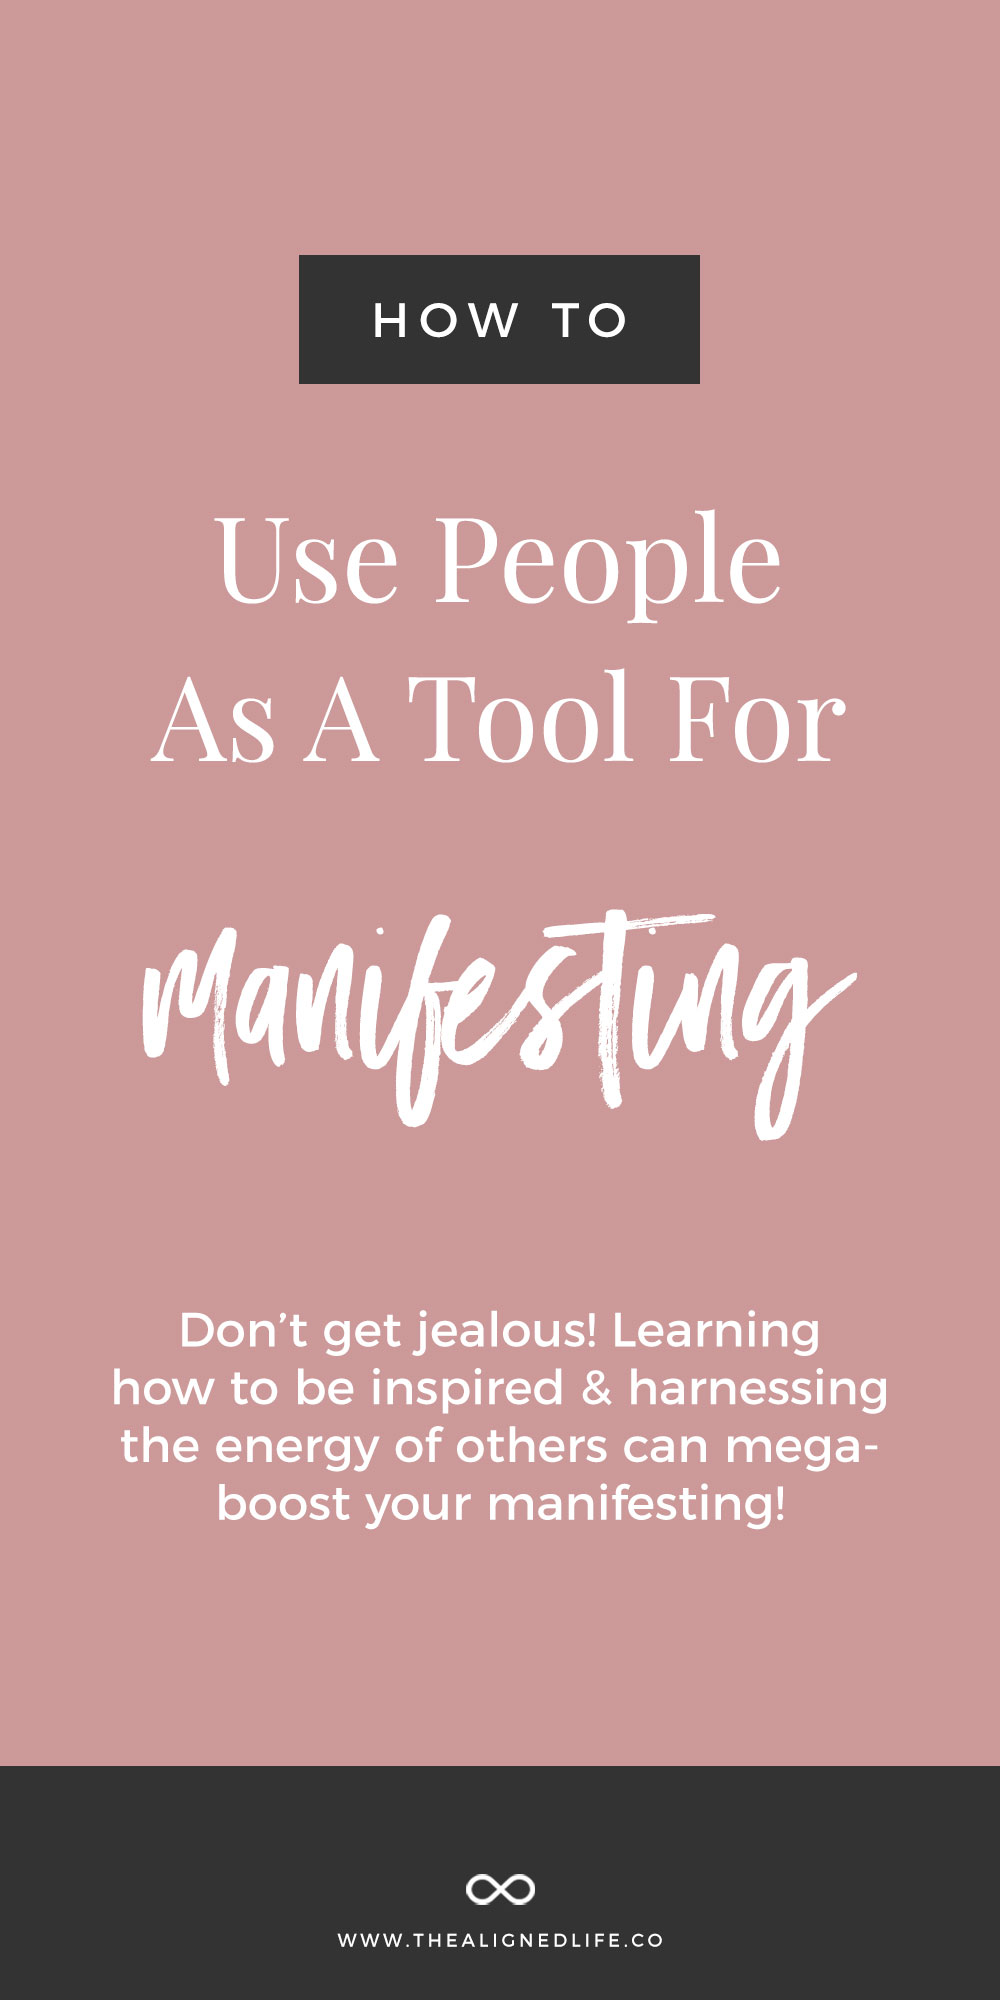 How To Use People As A Tool For Manifesting